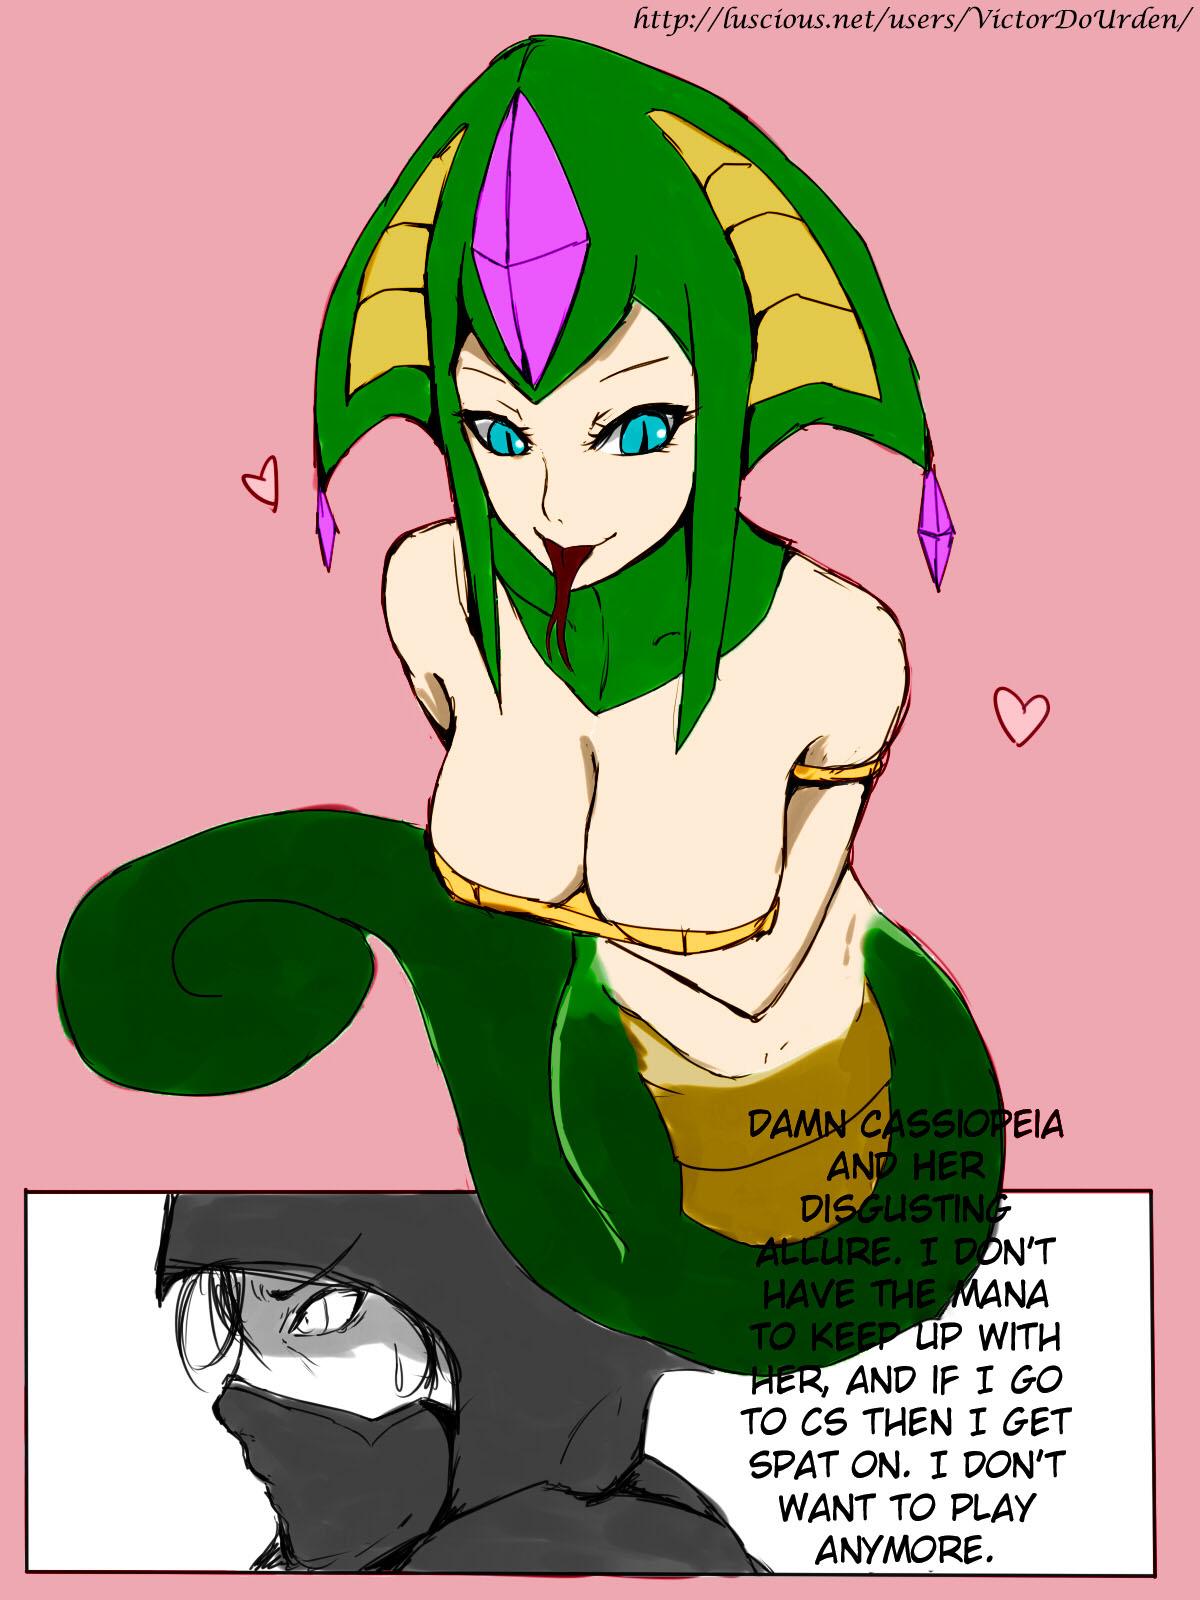 Sexcam Love Of Lamia - League of legends Skirt - Page 2